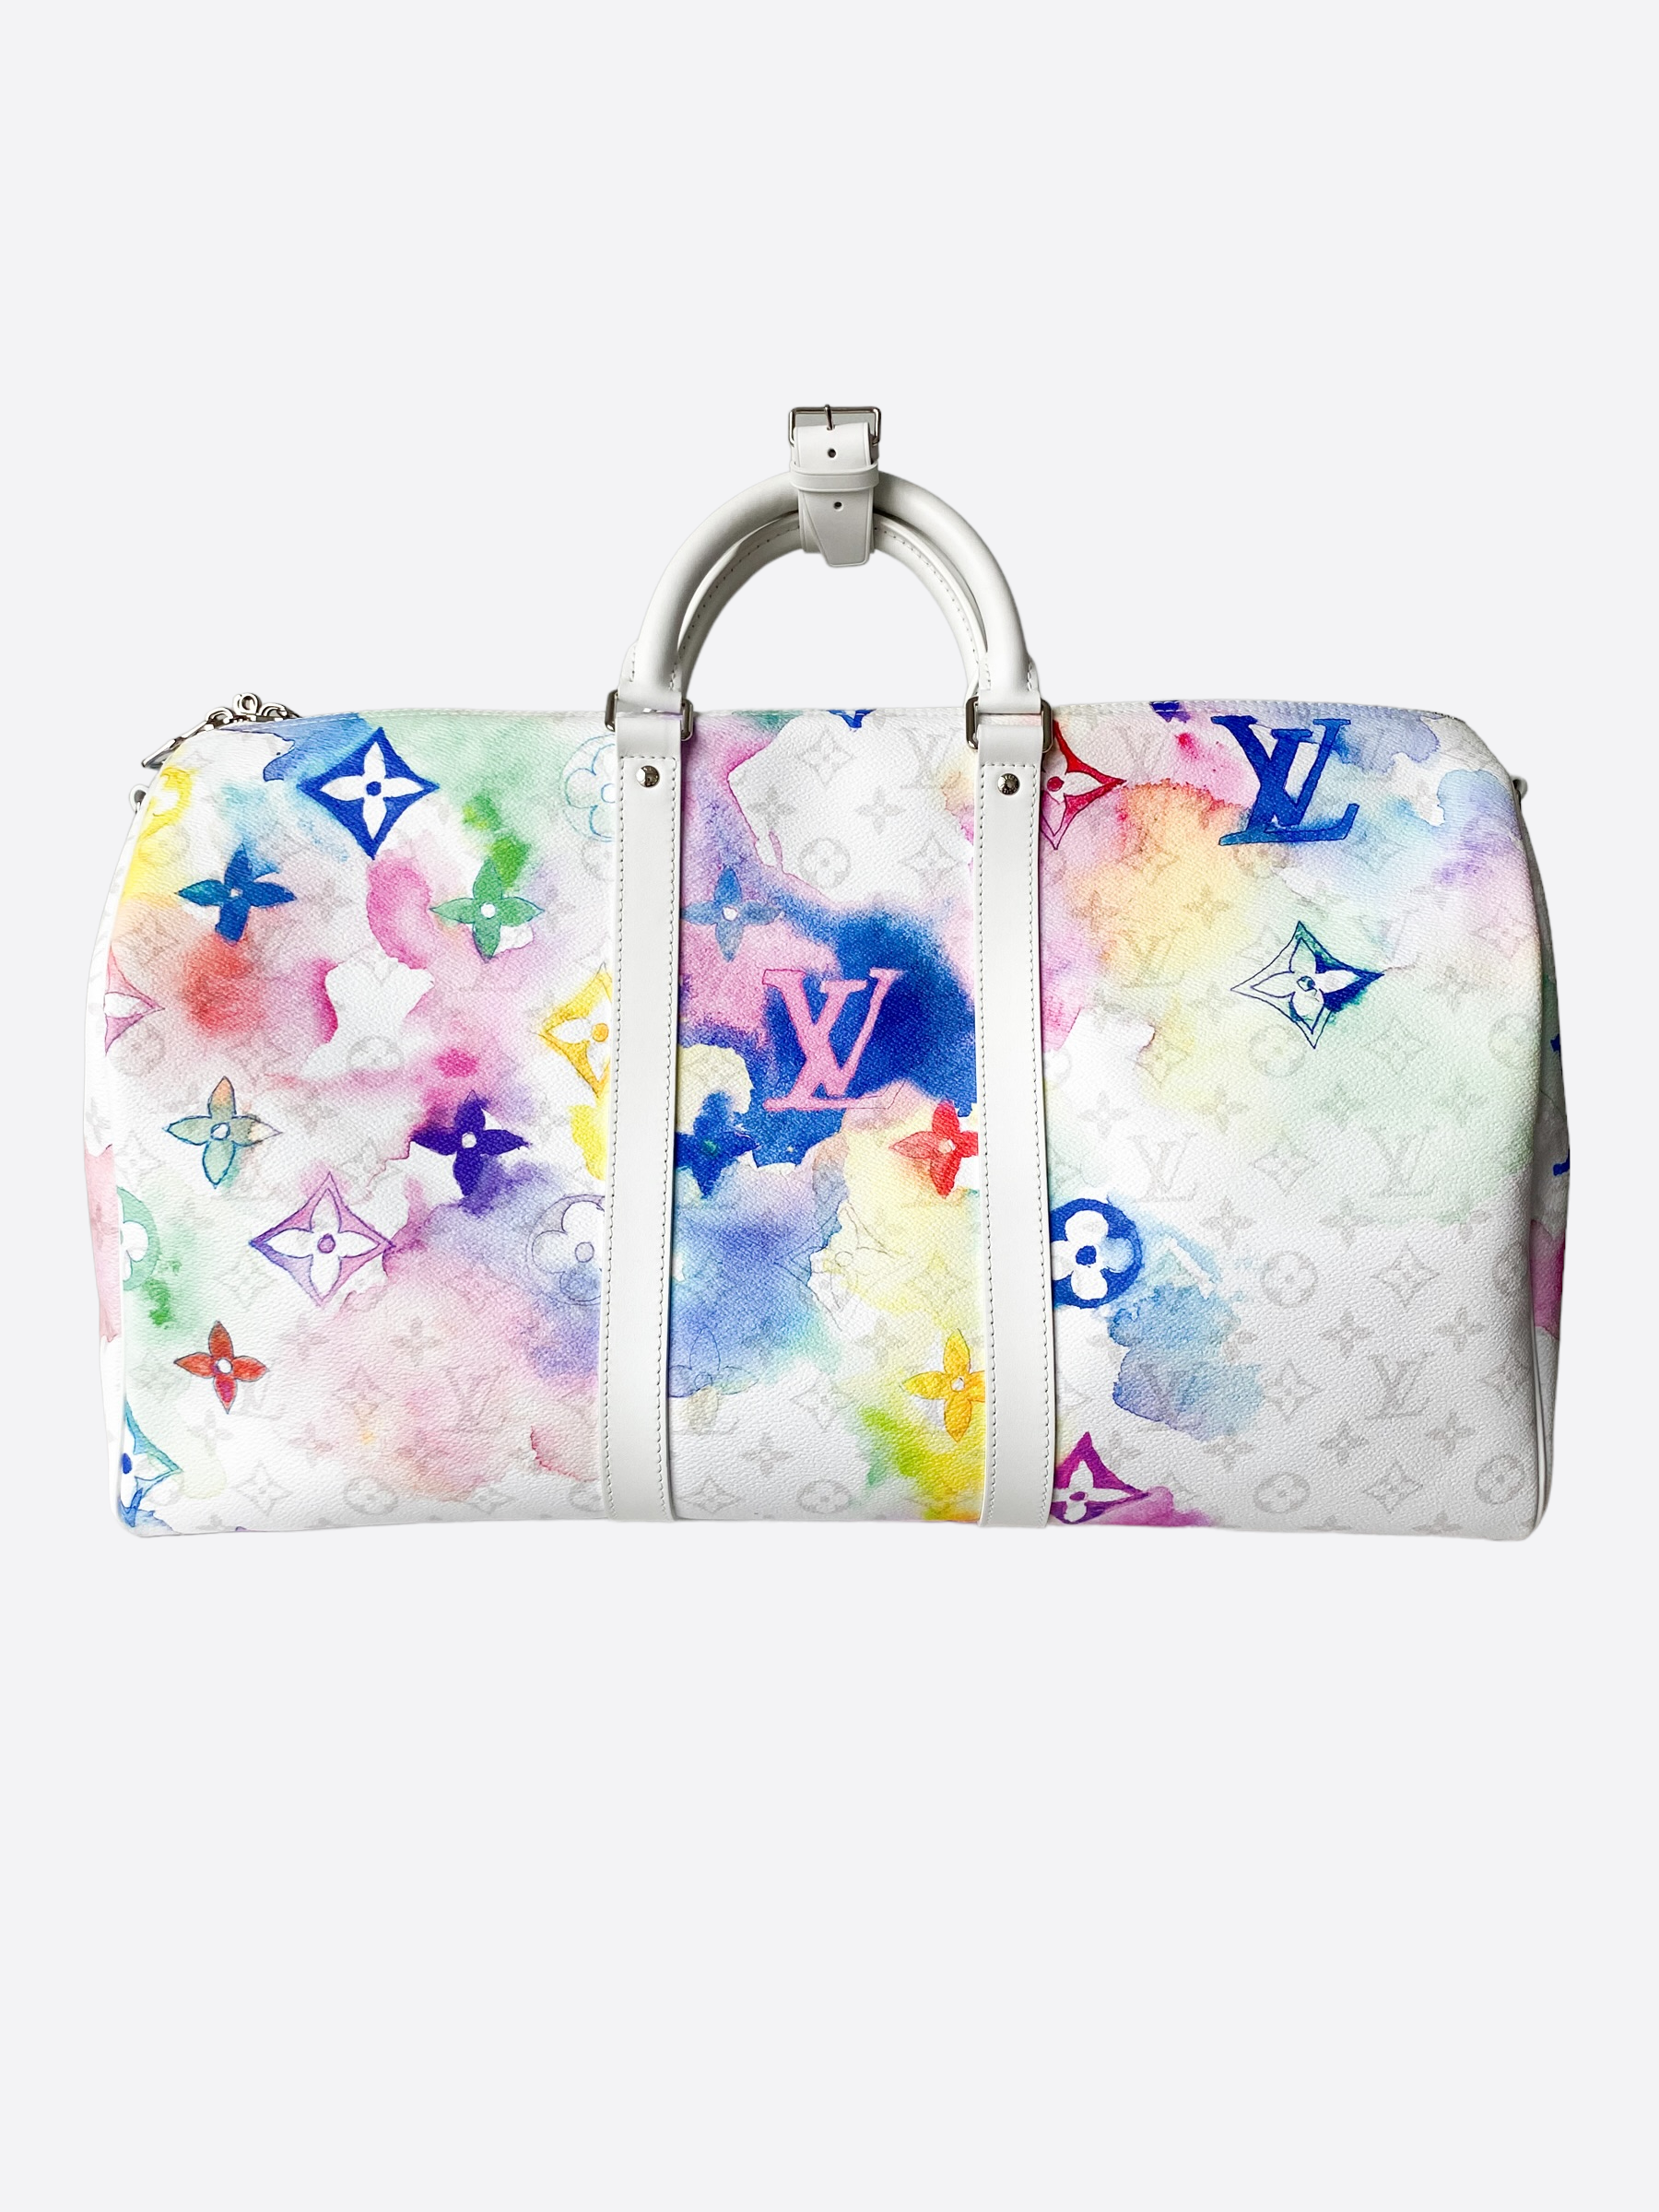 New Louis Vuitton Watercolor Keepall Bag 50 For Sale at 1stDibs